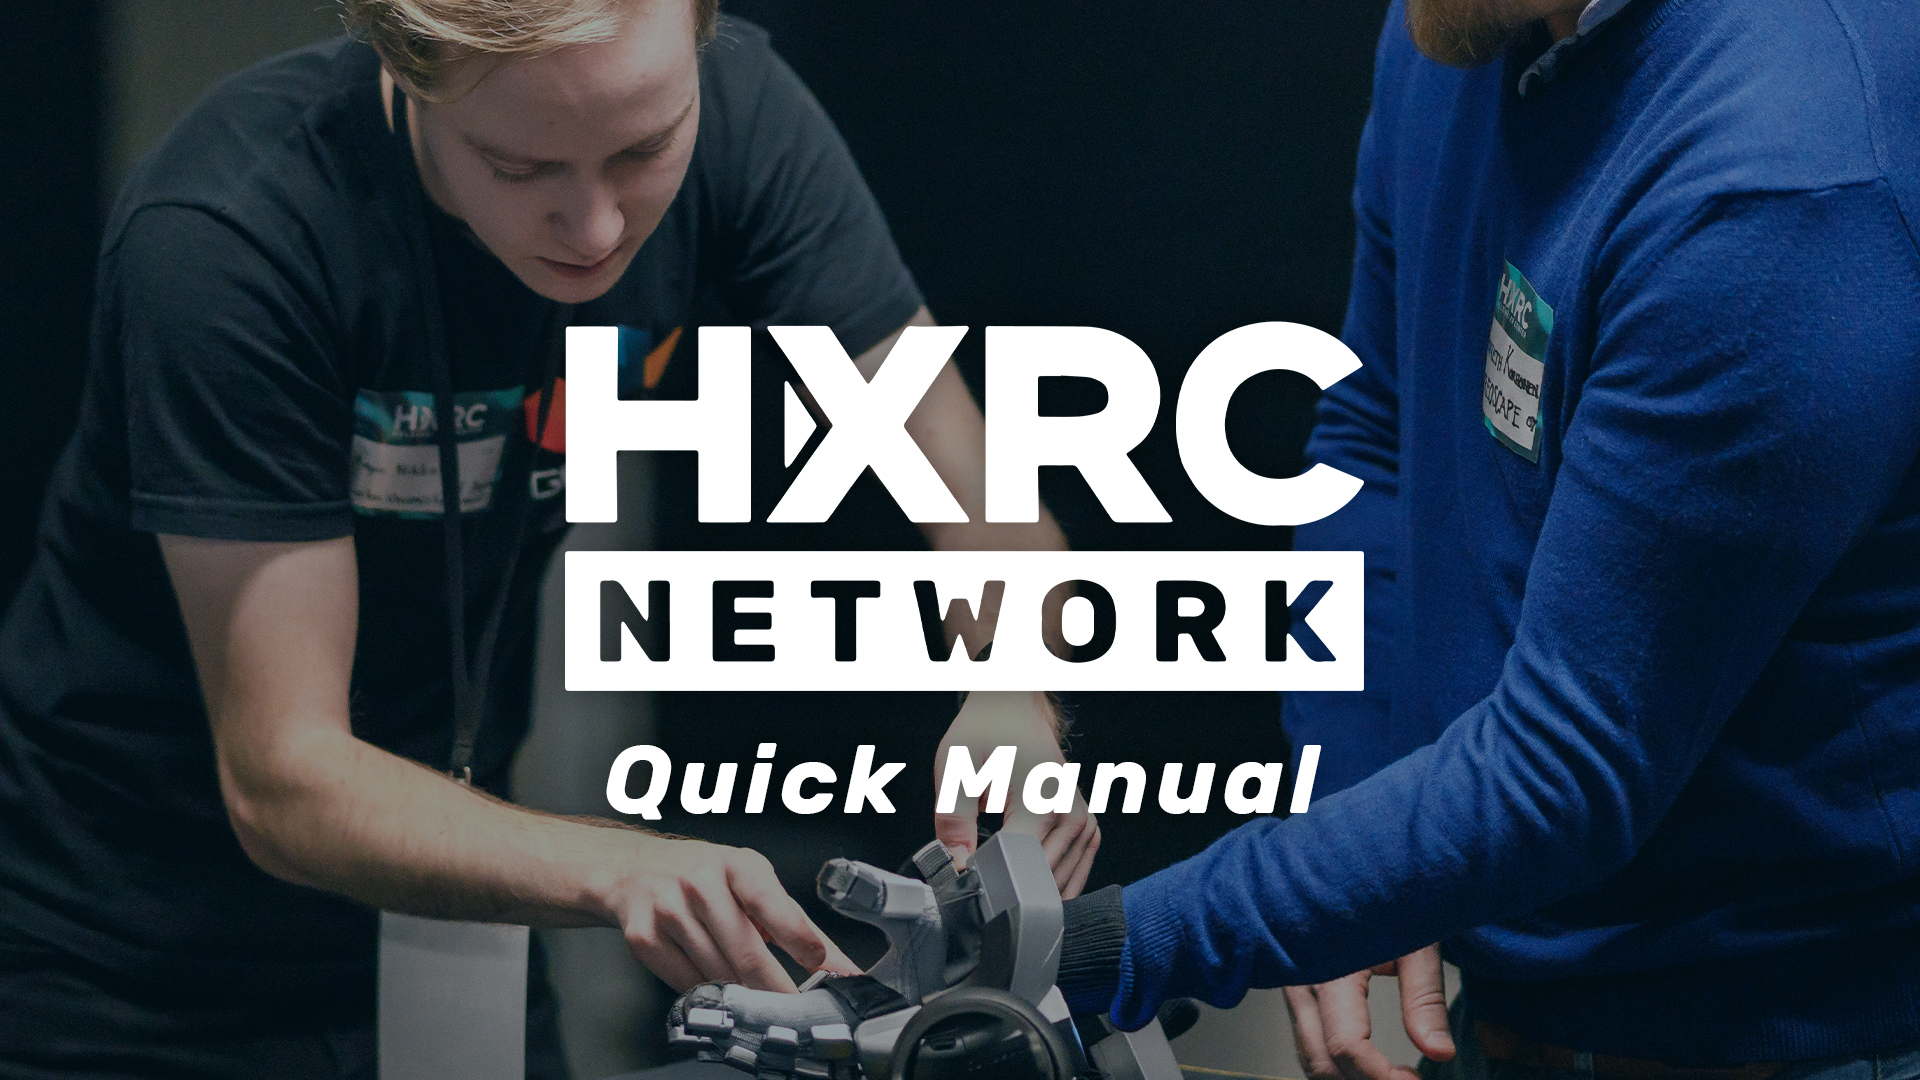 A Quick Manual to HXRC Network